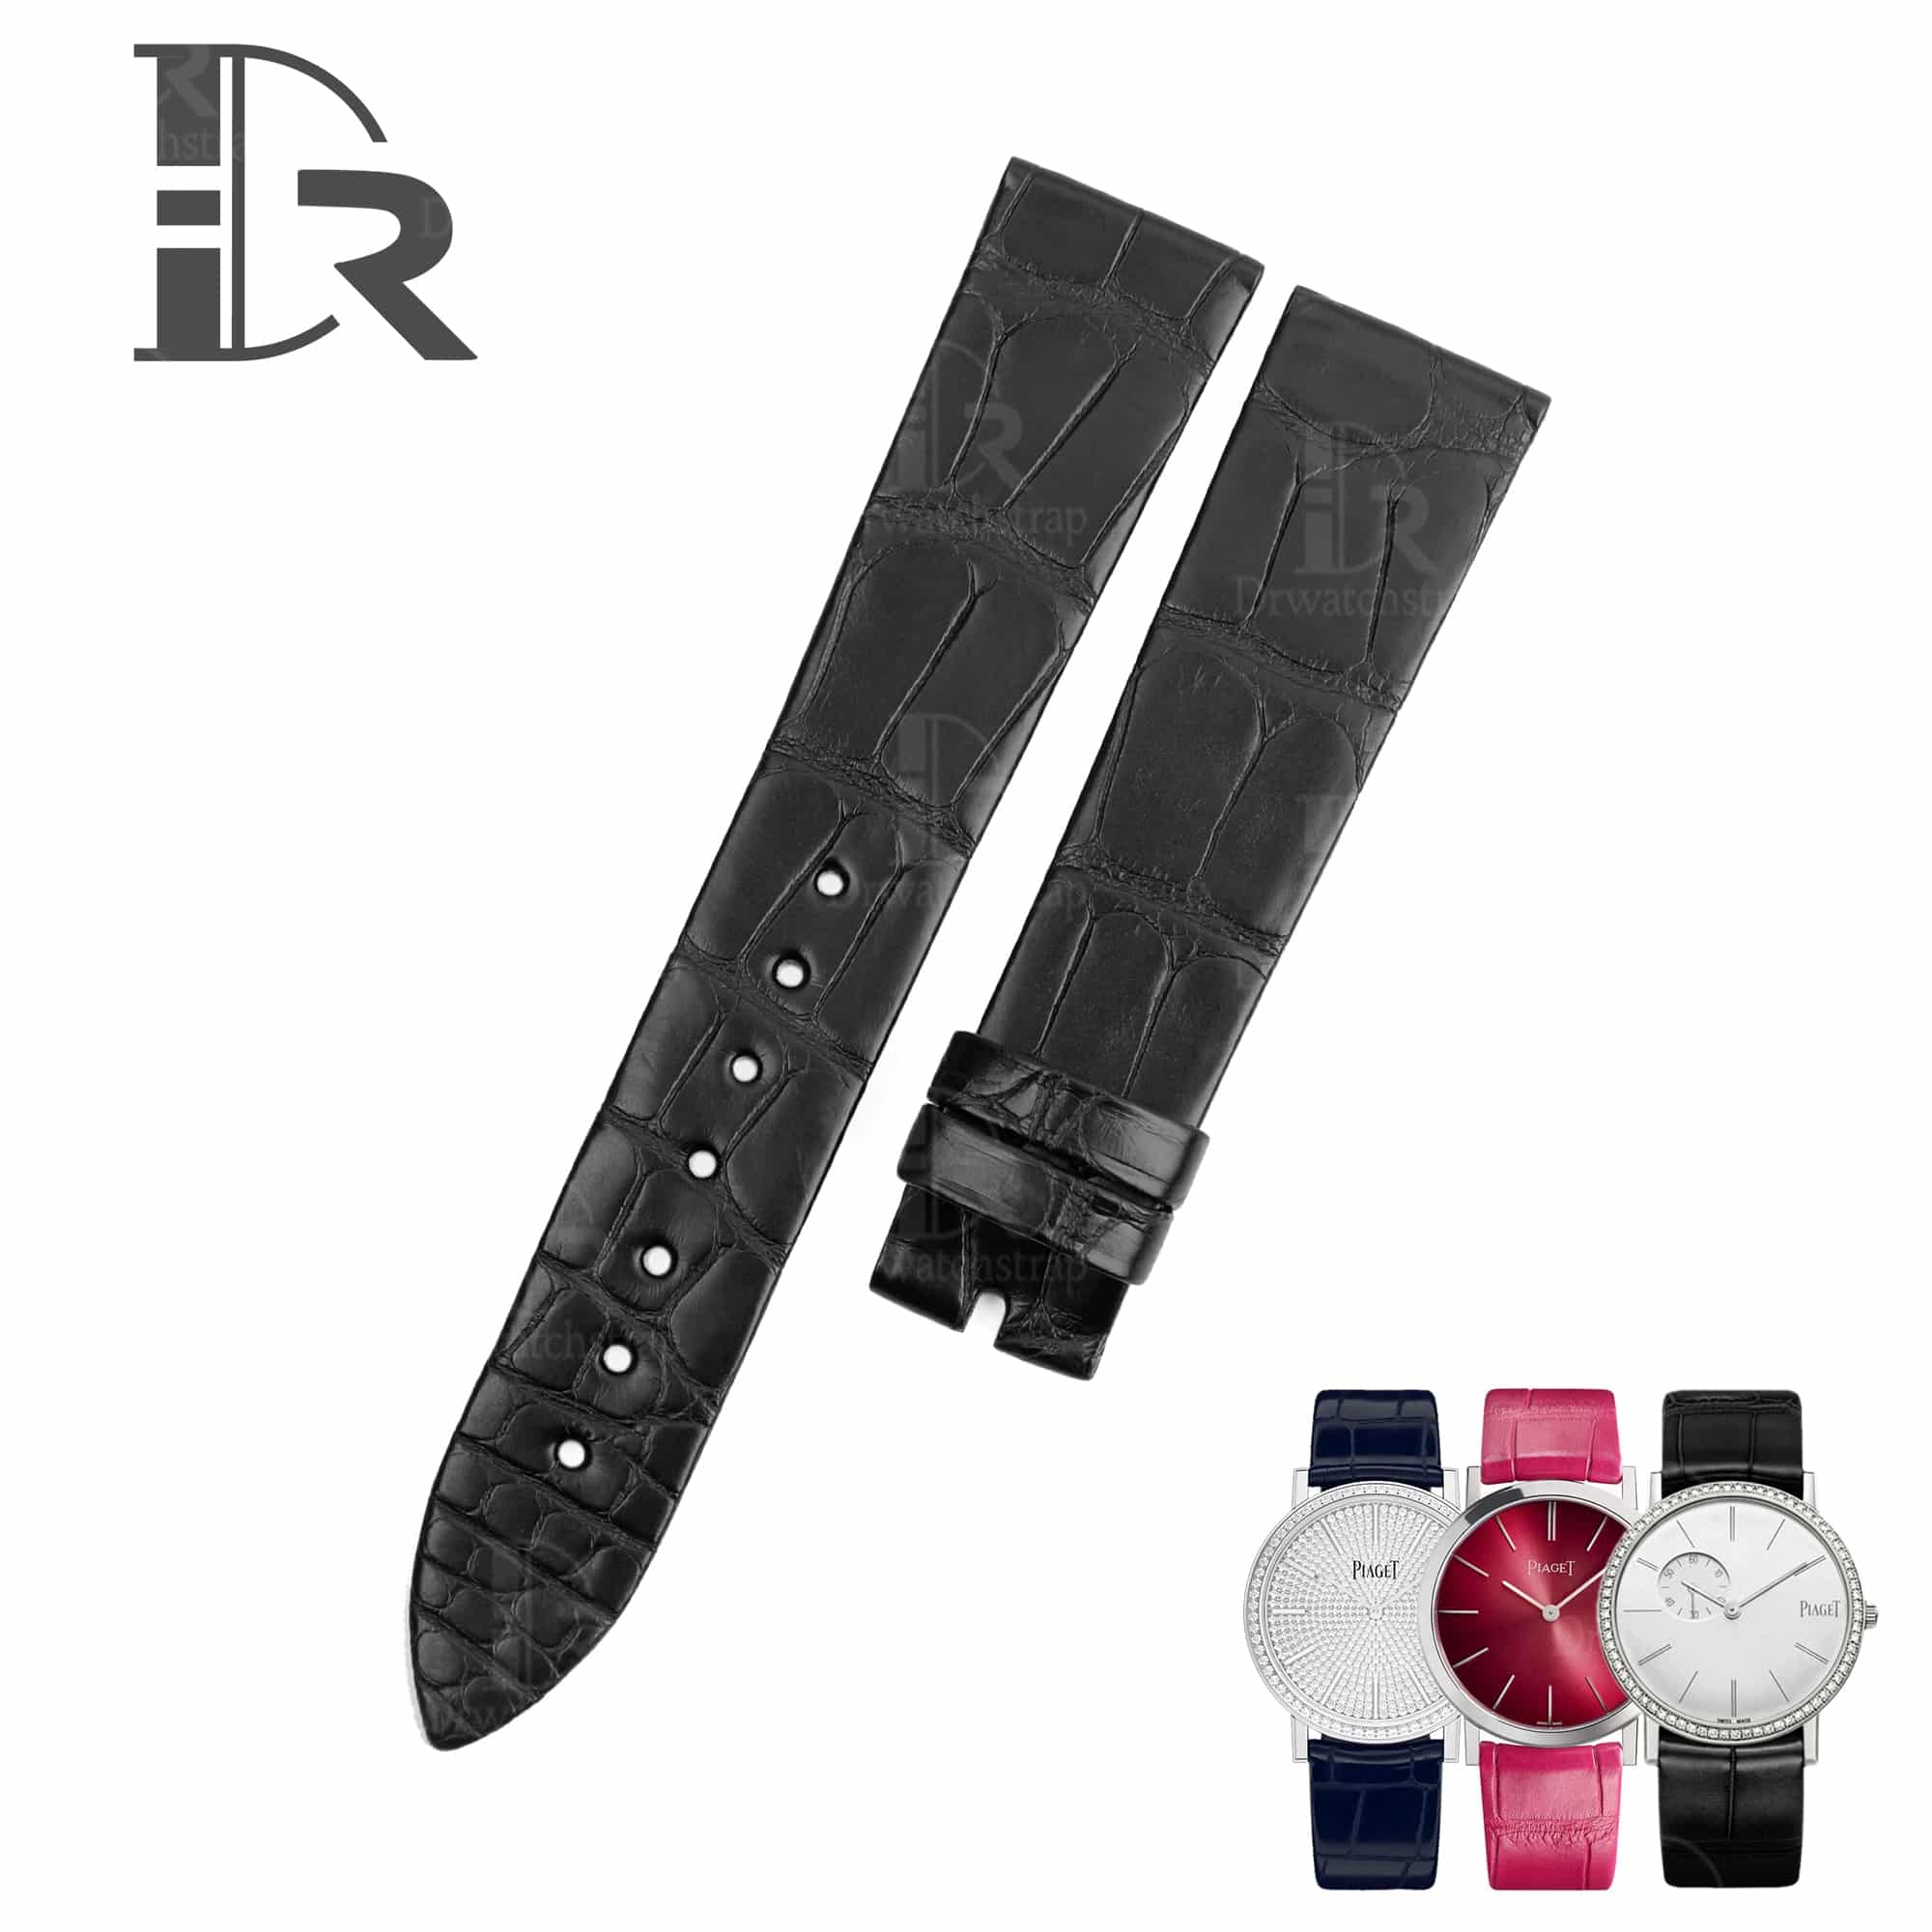 Buy replacement Piaget Altiplano Ultimate Slim black leather strap lug size 19mm*16mm